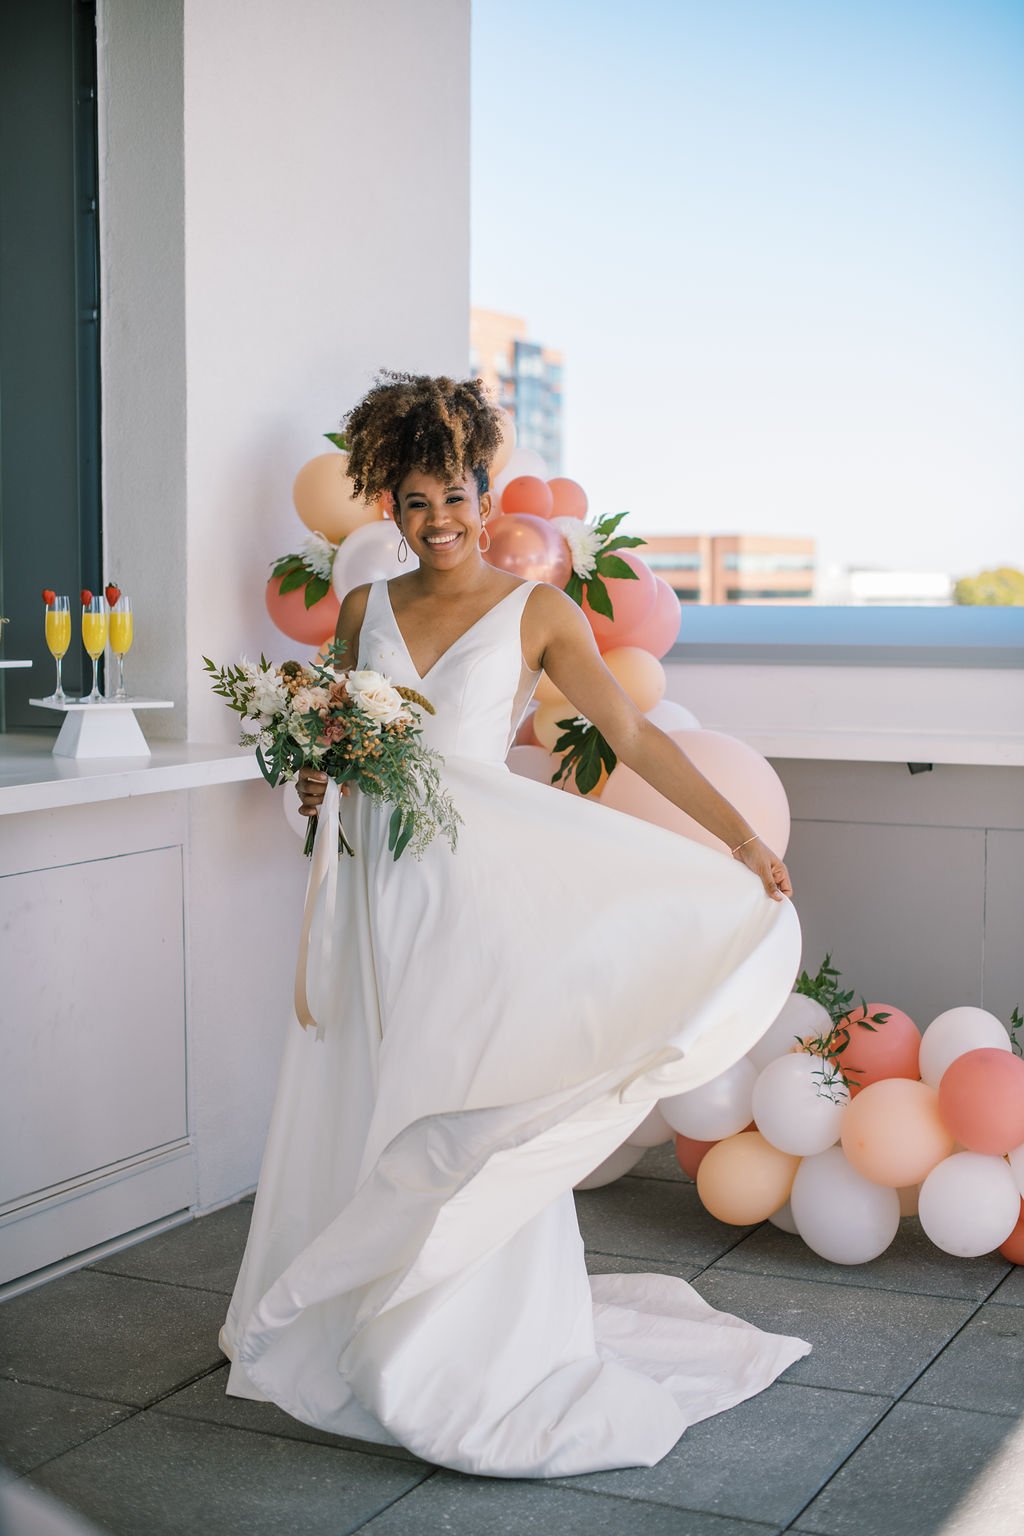 Bride Twirl Wedding Dress Balloons The Willard Rooftop Lounge at AC Hotel Raleigh Downtown Fancy This Photography